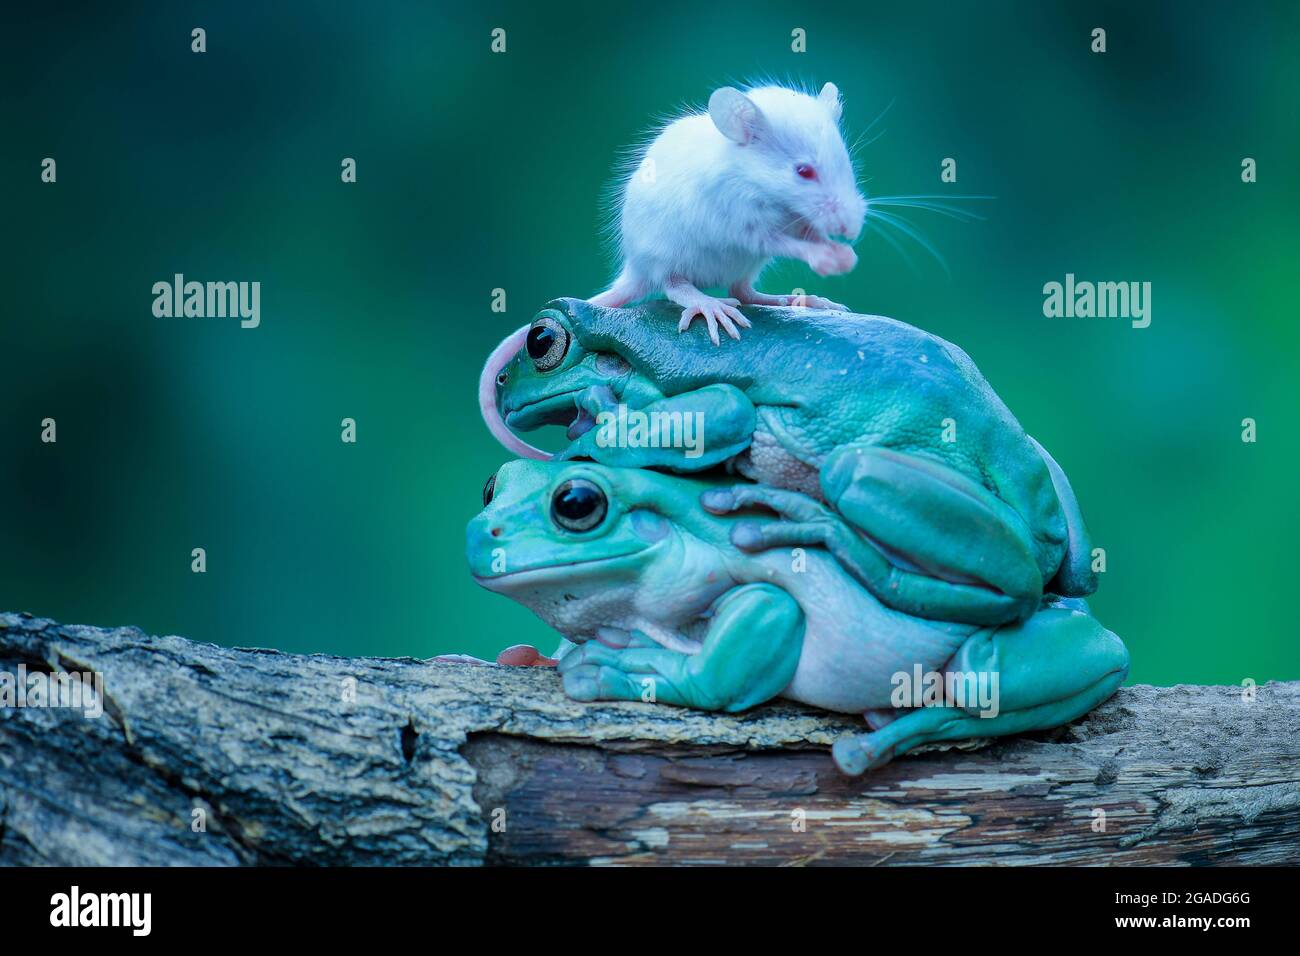 As the two amphibians smiled with glee, the mouse balanced on their heads. BOGOR, INDONESIA: THIS POOR mouse got swallowed WHOLE after greeting two du Stock Photo